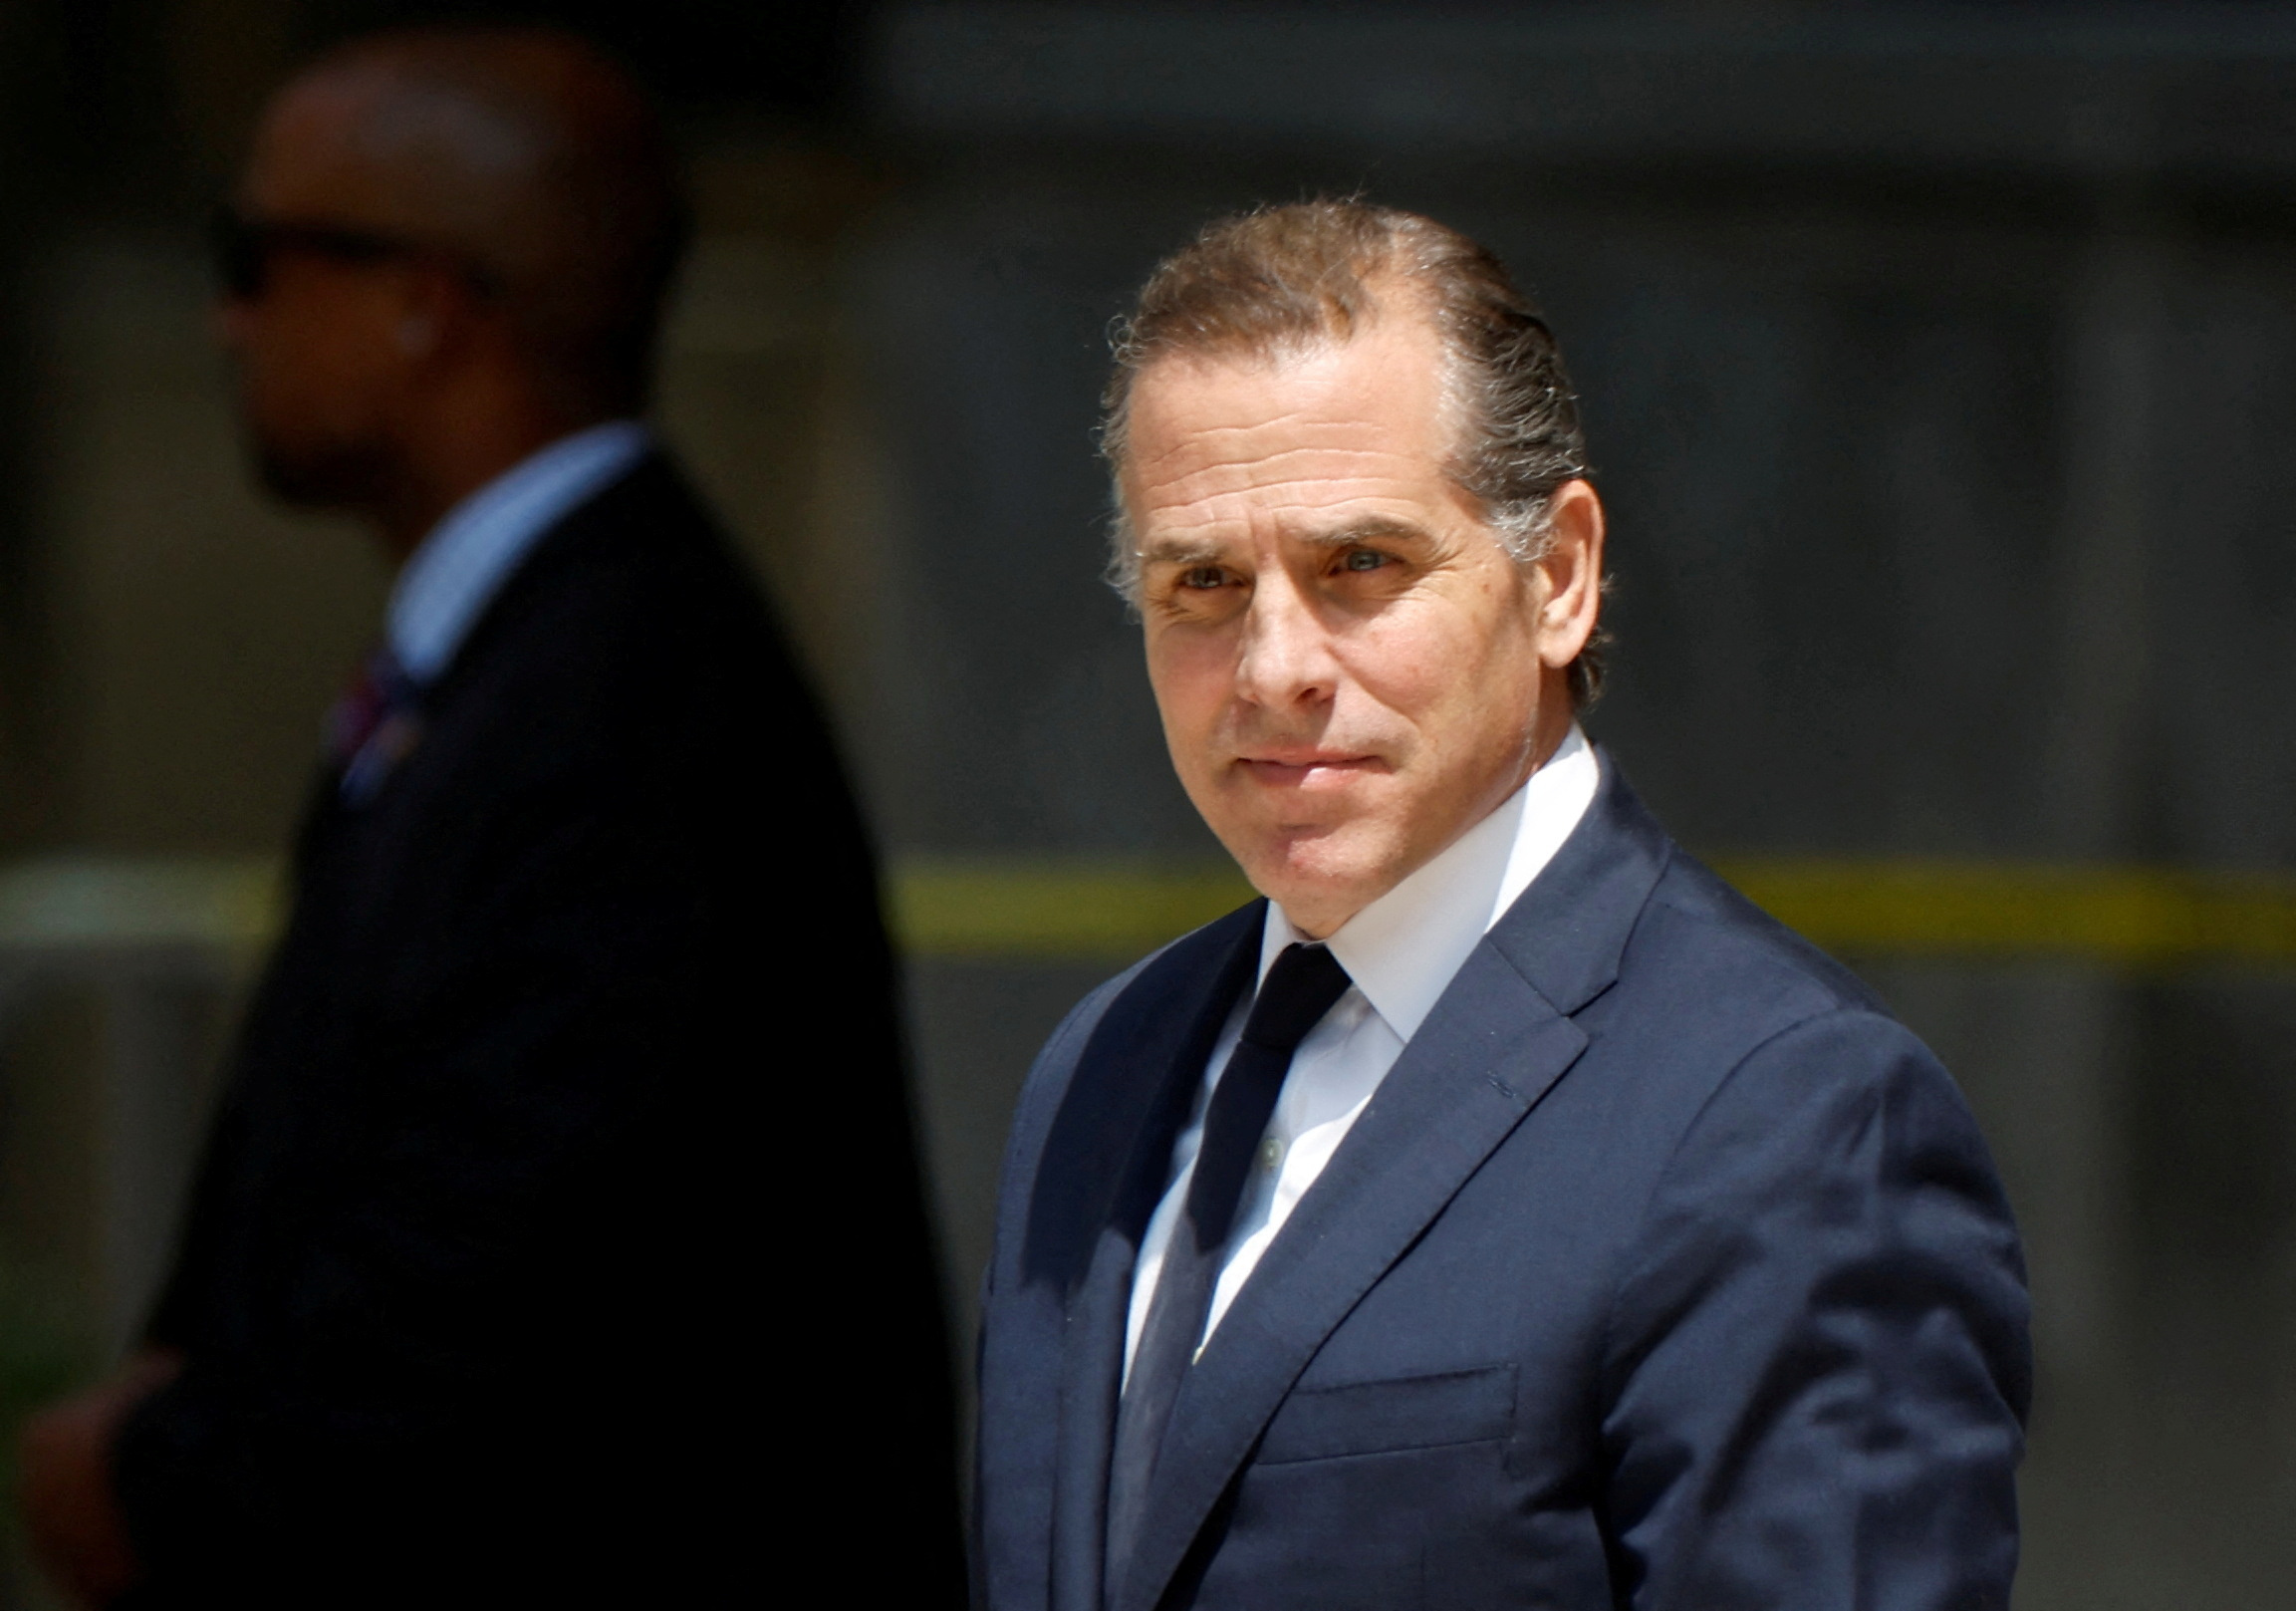 PHOTO: Hunter Biden, son of U.S. President Joe Biden, departs federal court after a plea hearing on two misdemeanor charges of willfully failing to pay income taxes in Wilmington, Del., July 26, 2023.